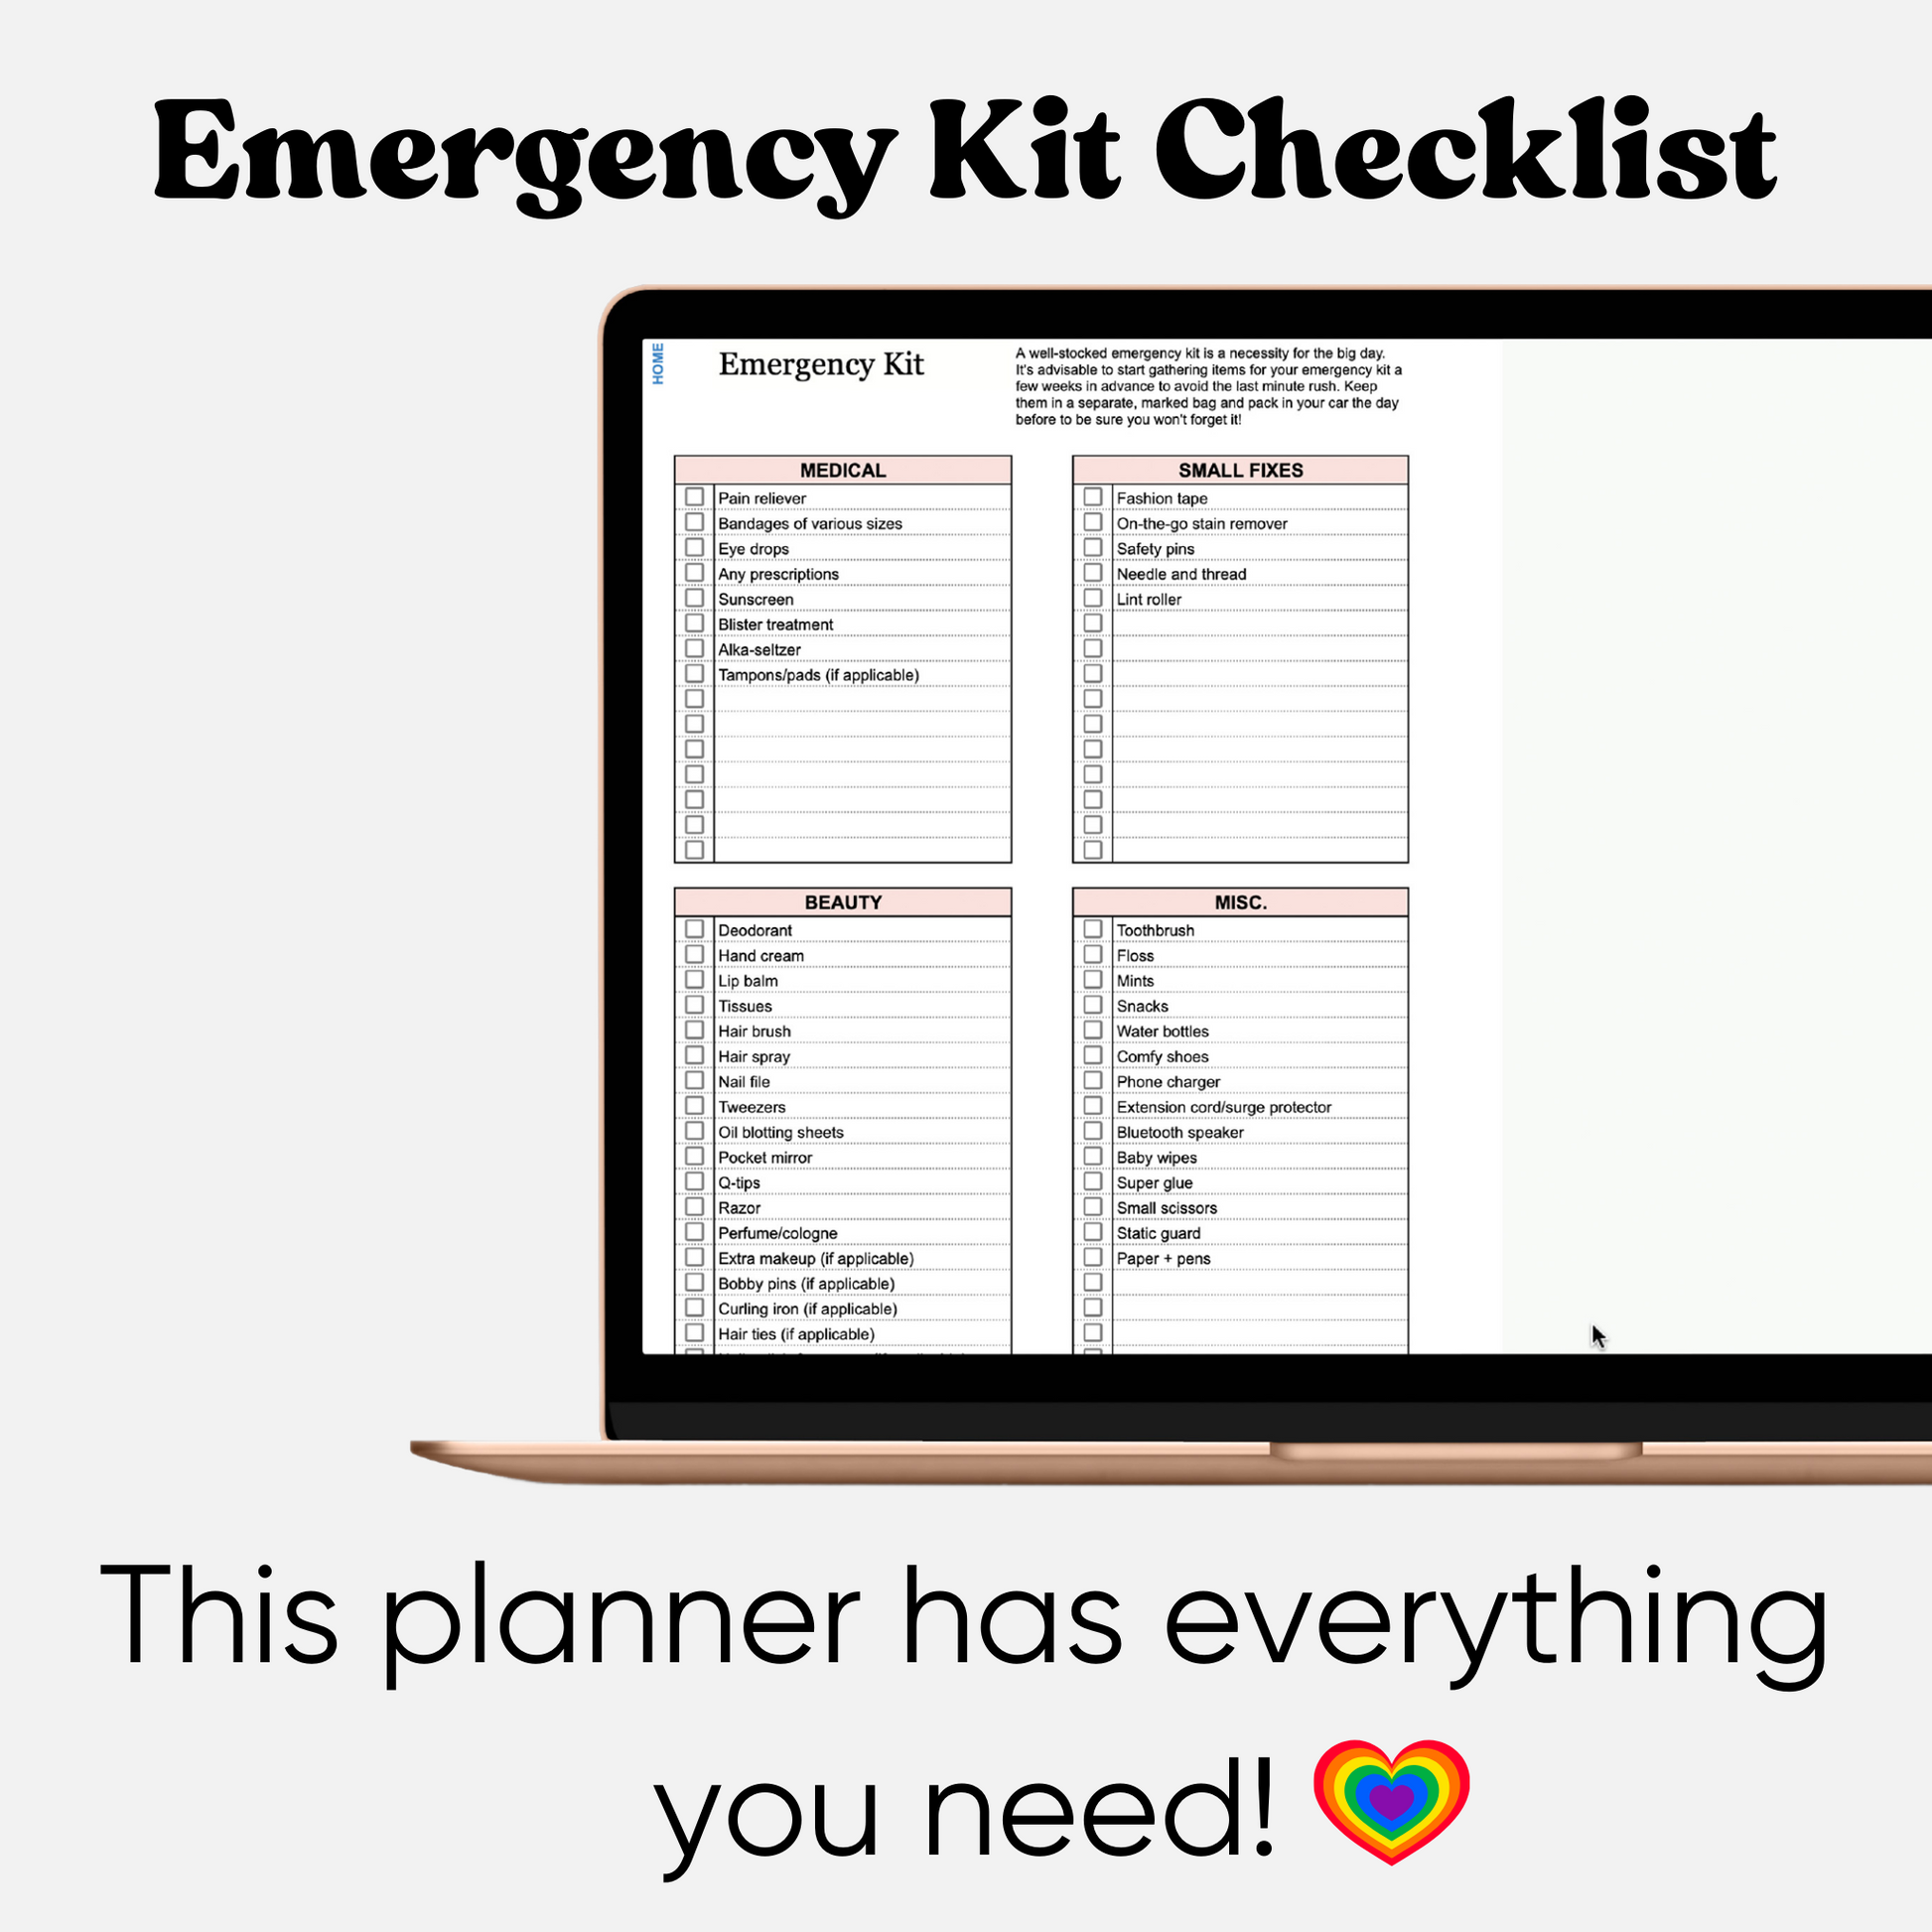 A preview of the LGBTQ+ Friendly Digital Wedding Planner, featuring a gender-neutral design. The image highlights sections for budgeting, guest list management, and a customizable seating chart for an inclusive wedding planning experience. Emergency kit checklist.